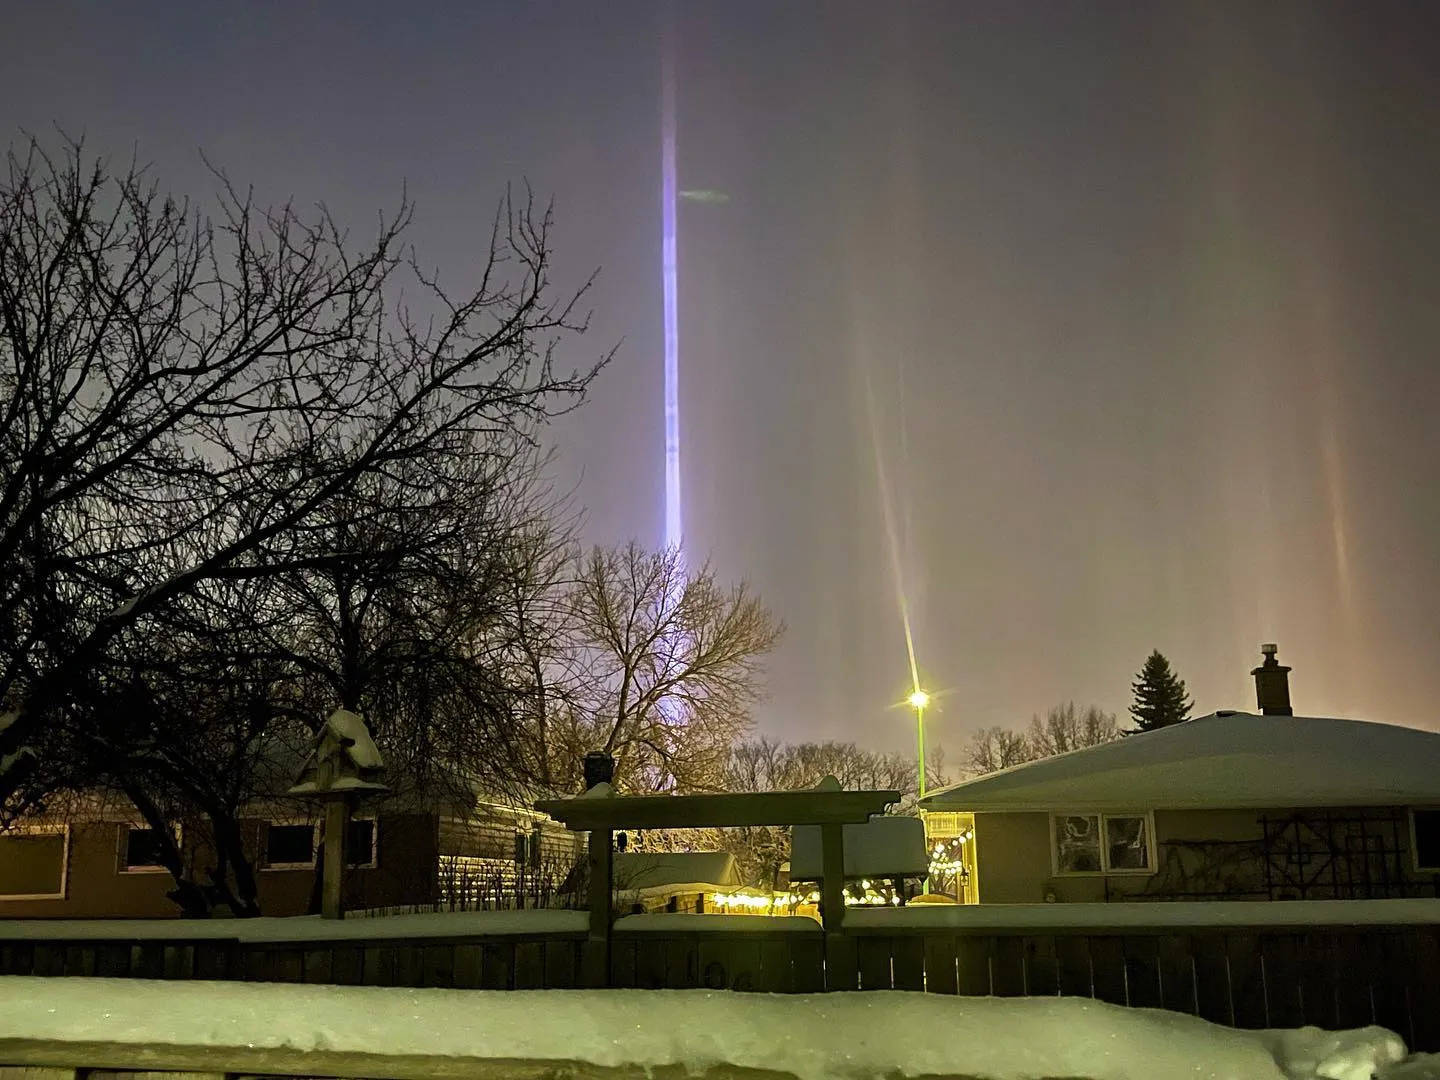 Canada night sky dazzles with stunning light pillars. What are these? 